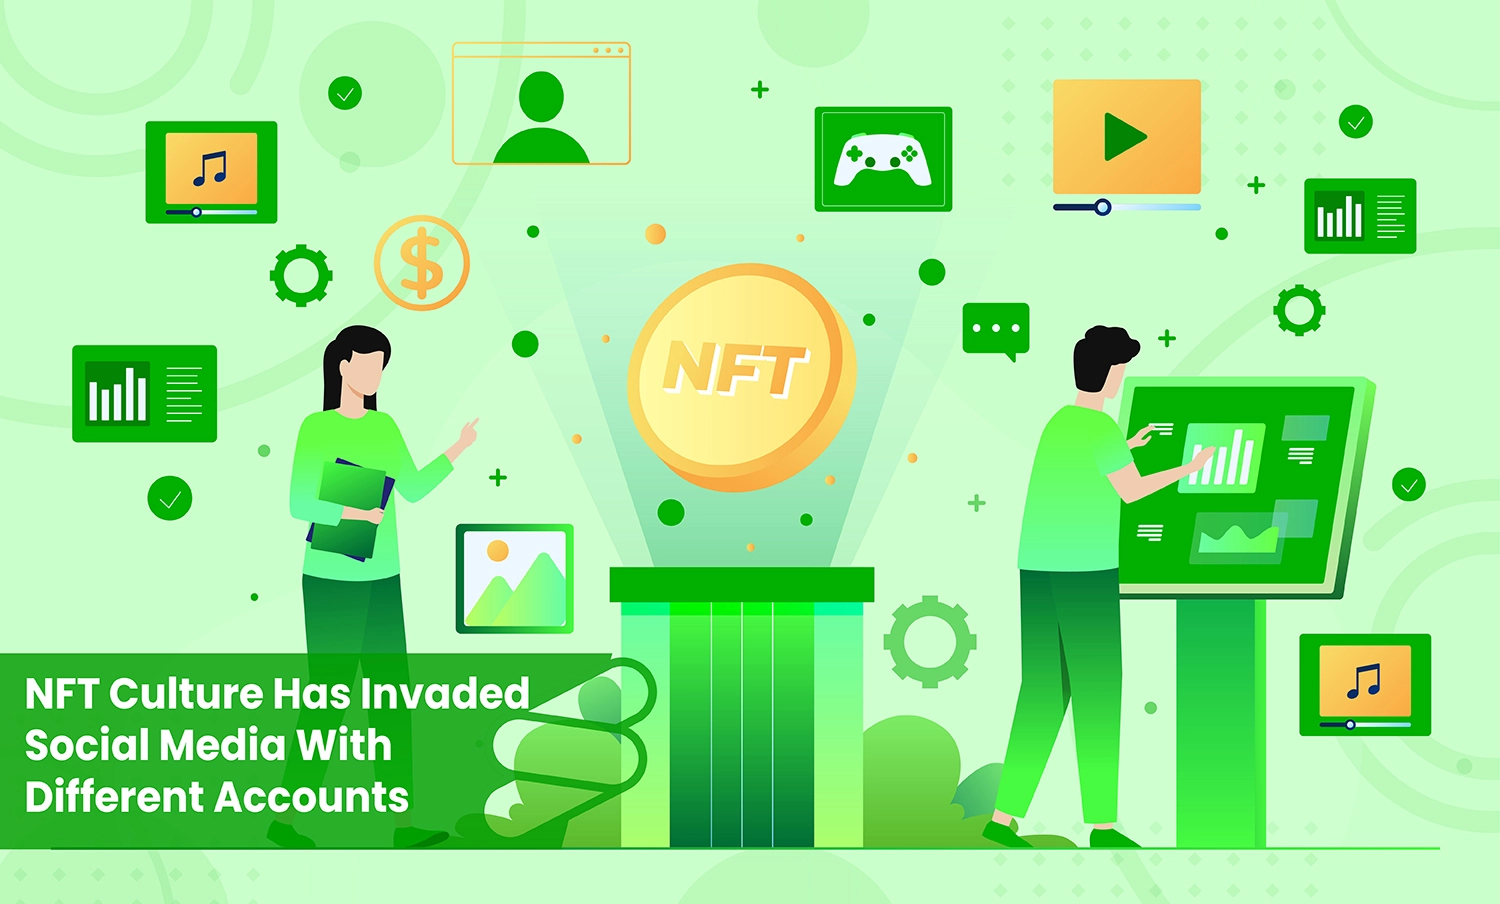 How NFT Culture Has Invaded Social Media With Different Accounts?